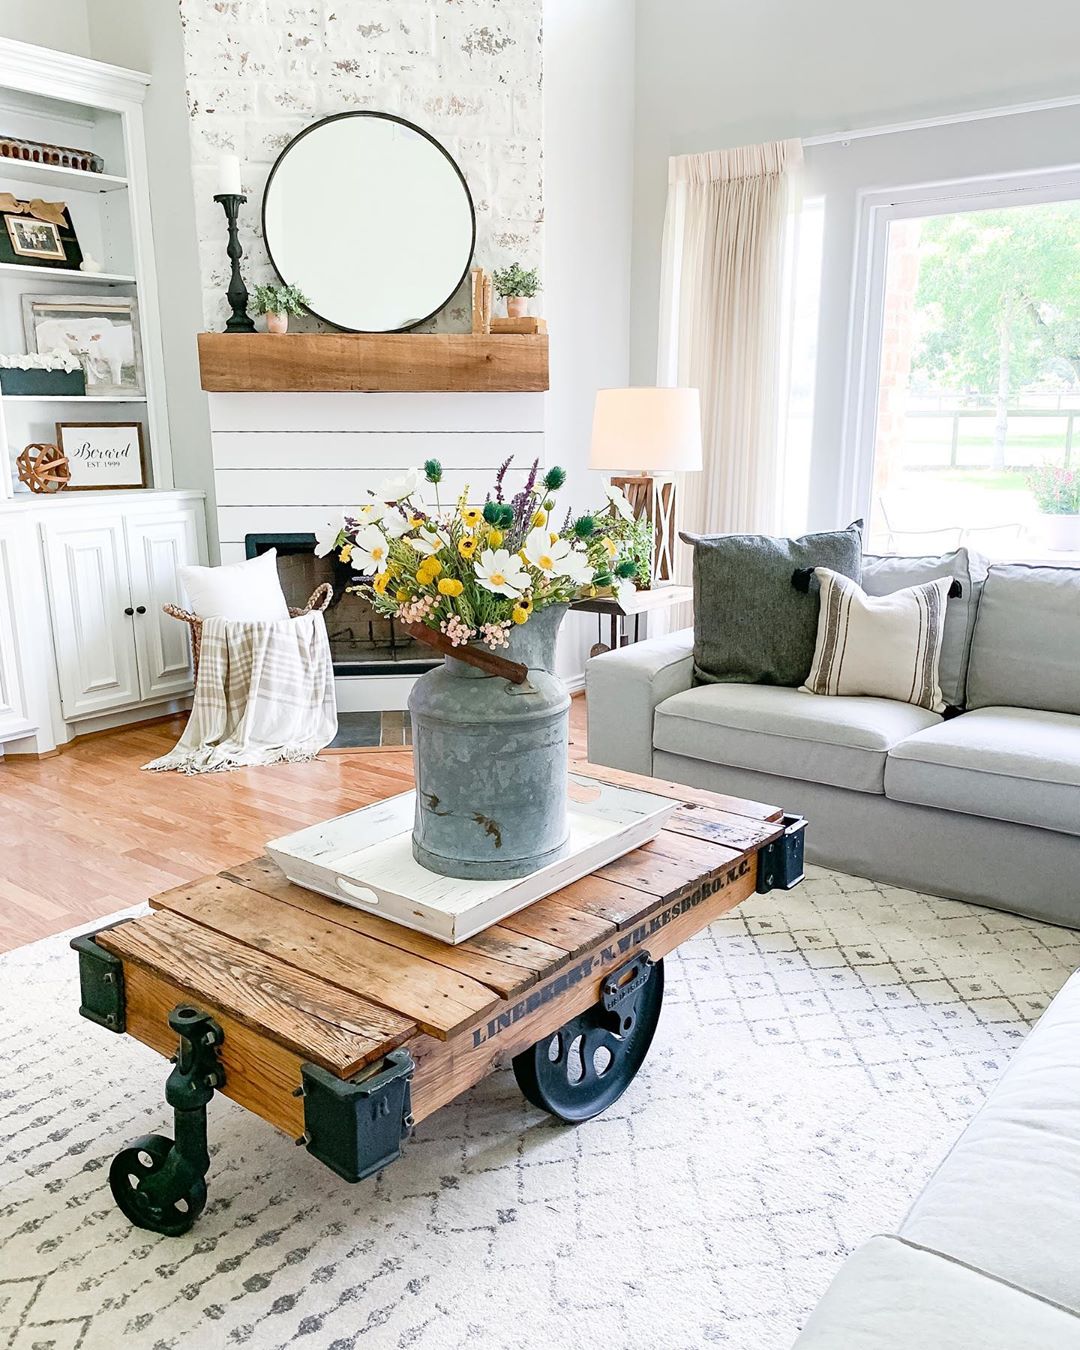 How To Mix Vintage And Modern Decor For A Unique Look